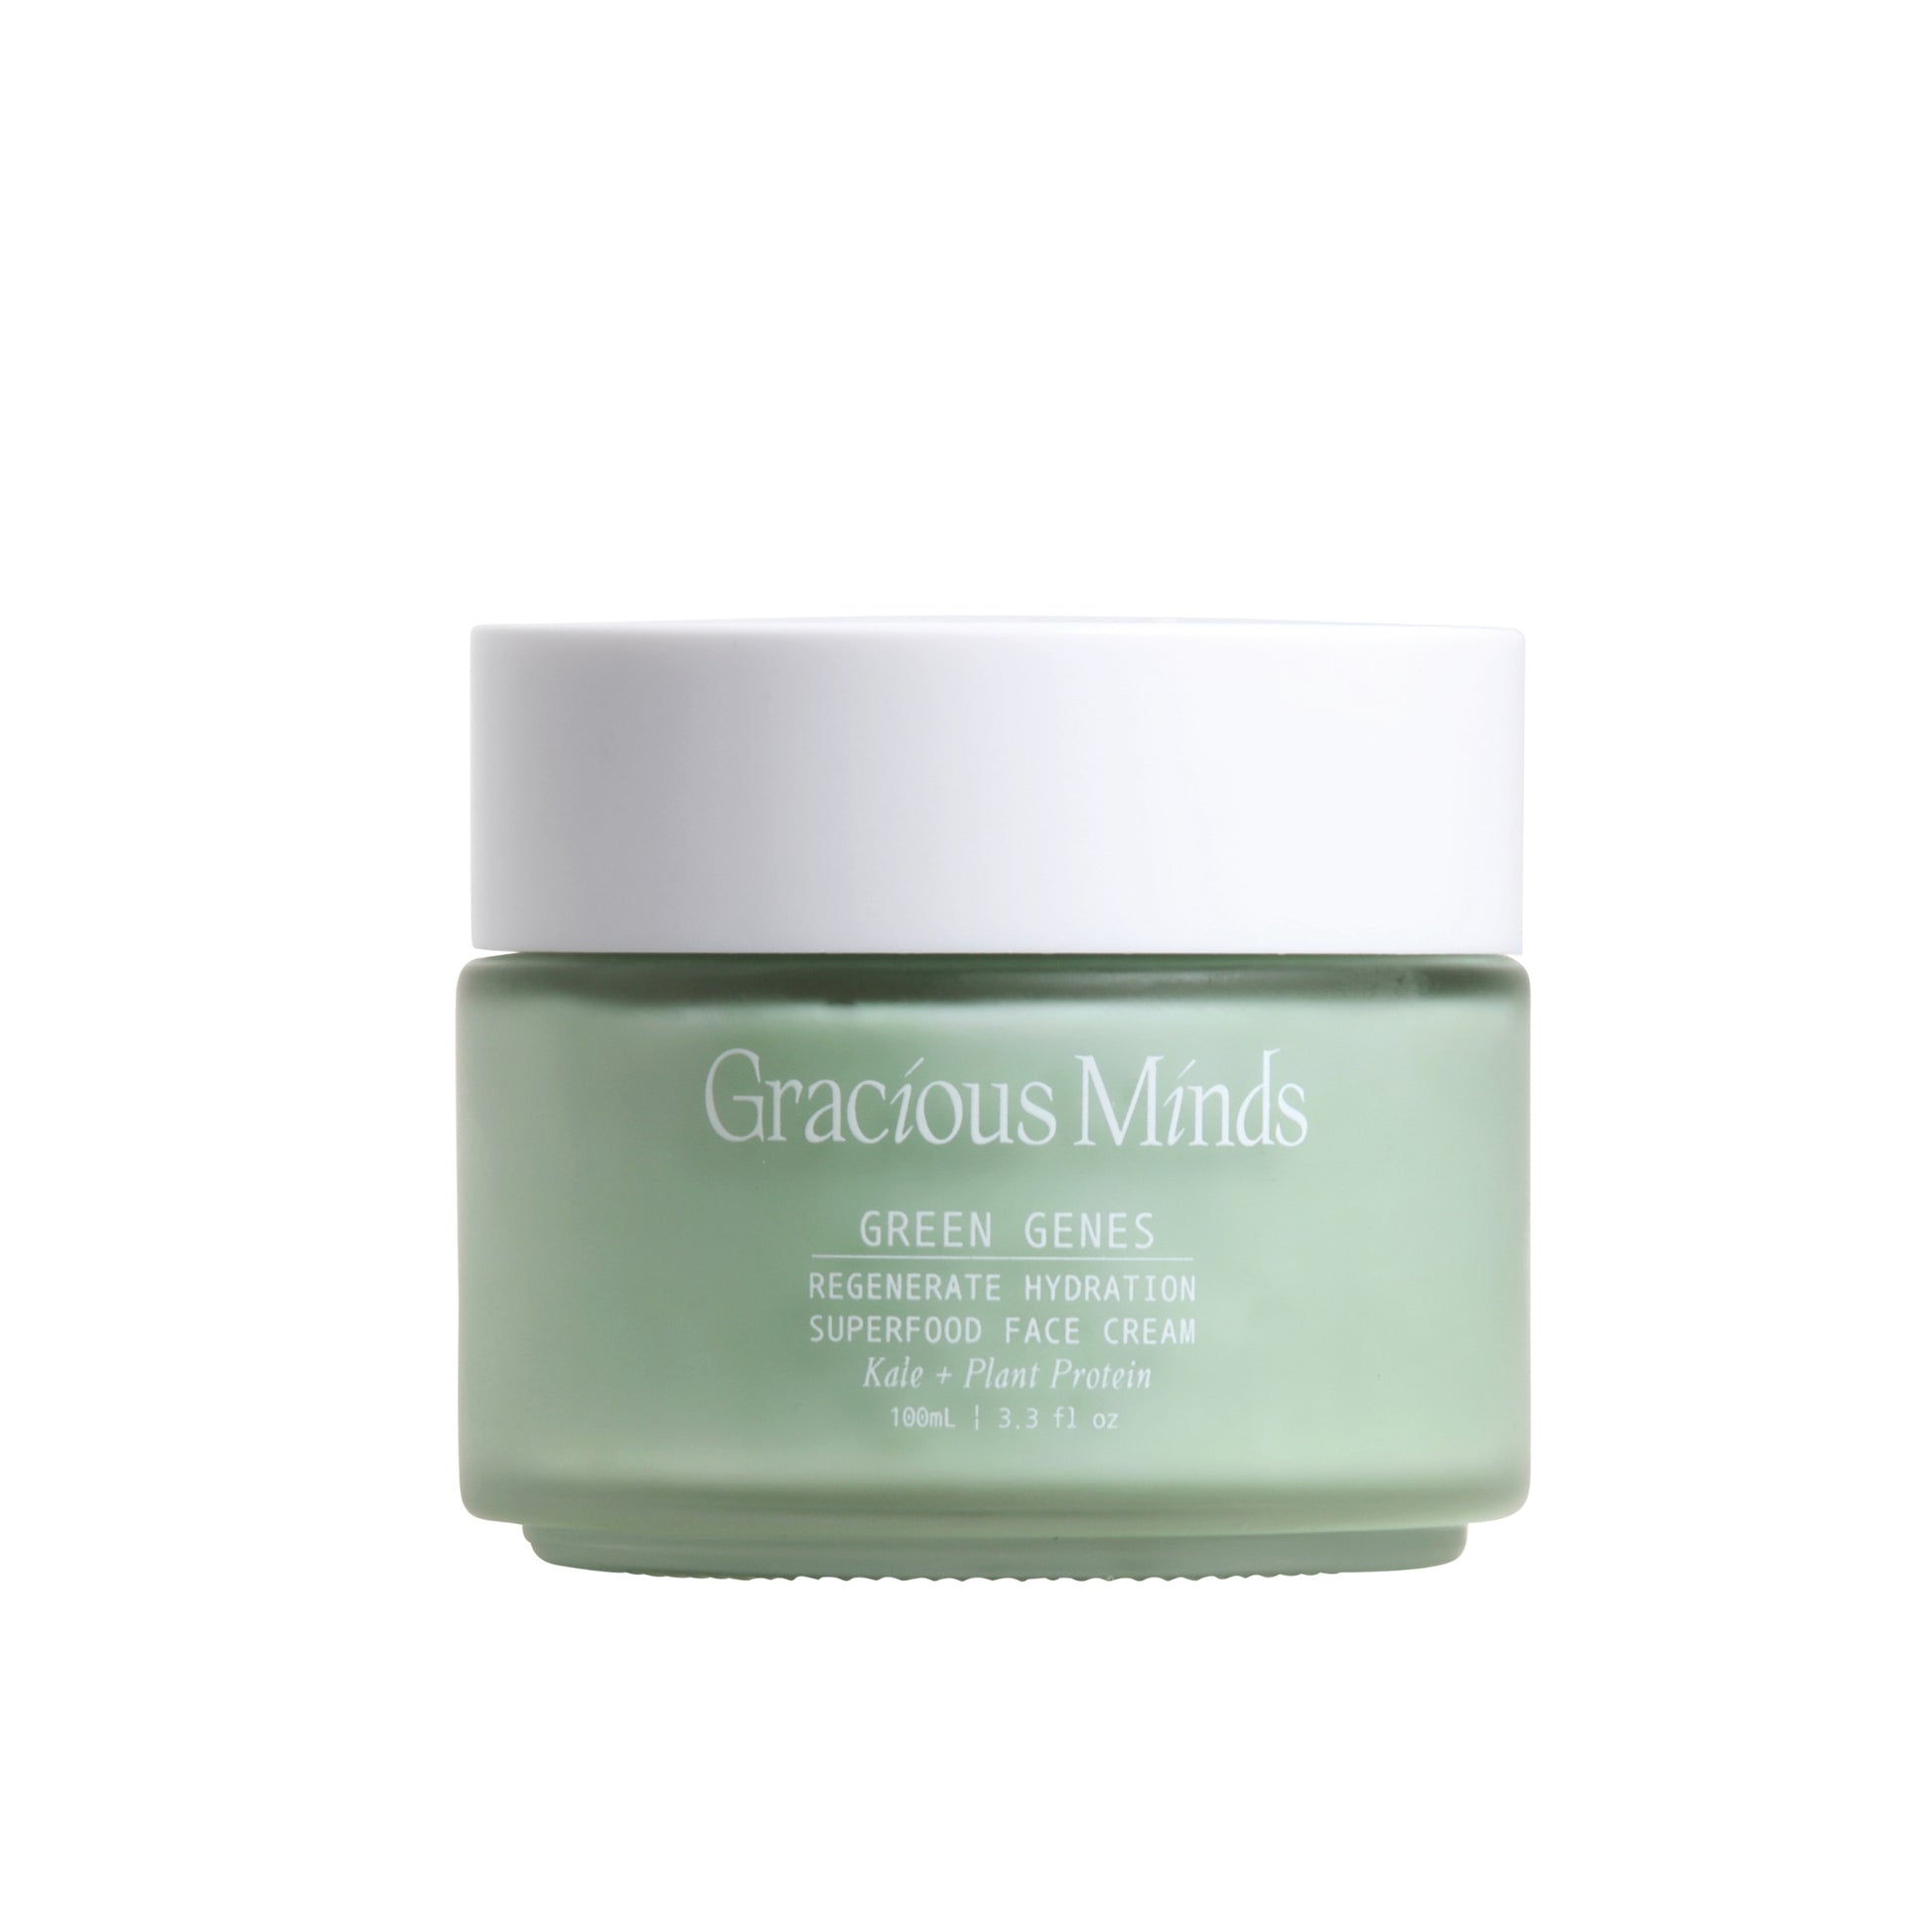 GRACIOUS MINDS Green Genes Regenerate Hydration Superfood Face Cream